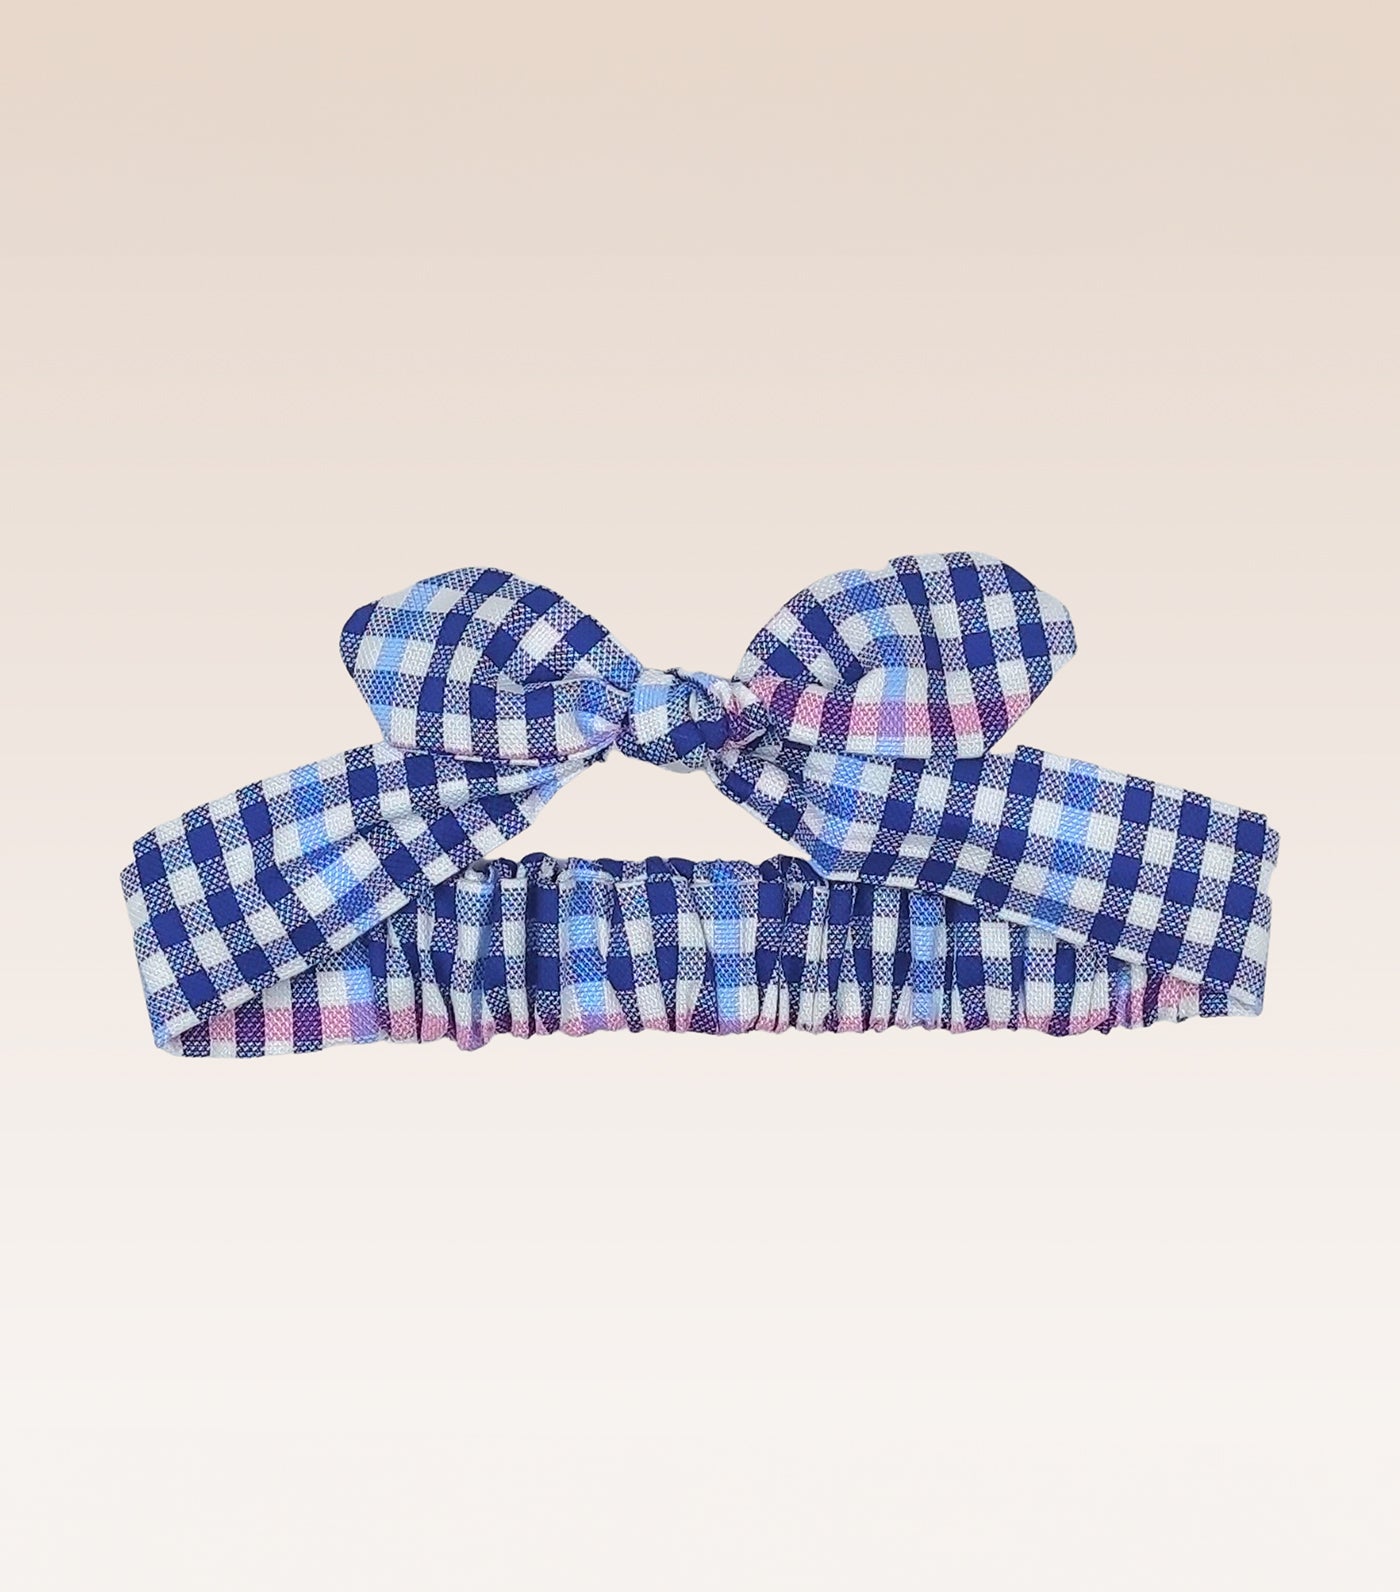 Candice Baby Girls Top and Checkered Shorts Set with Headband